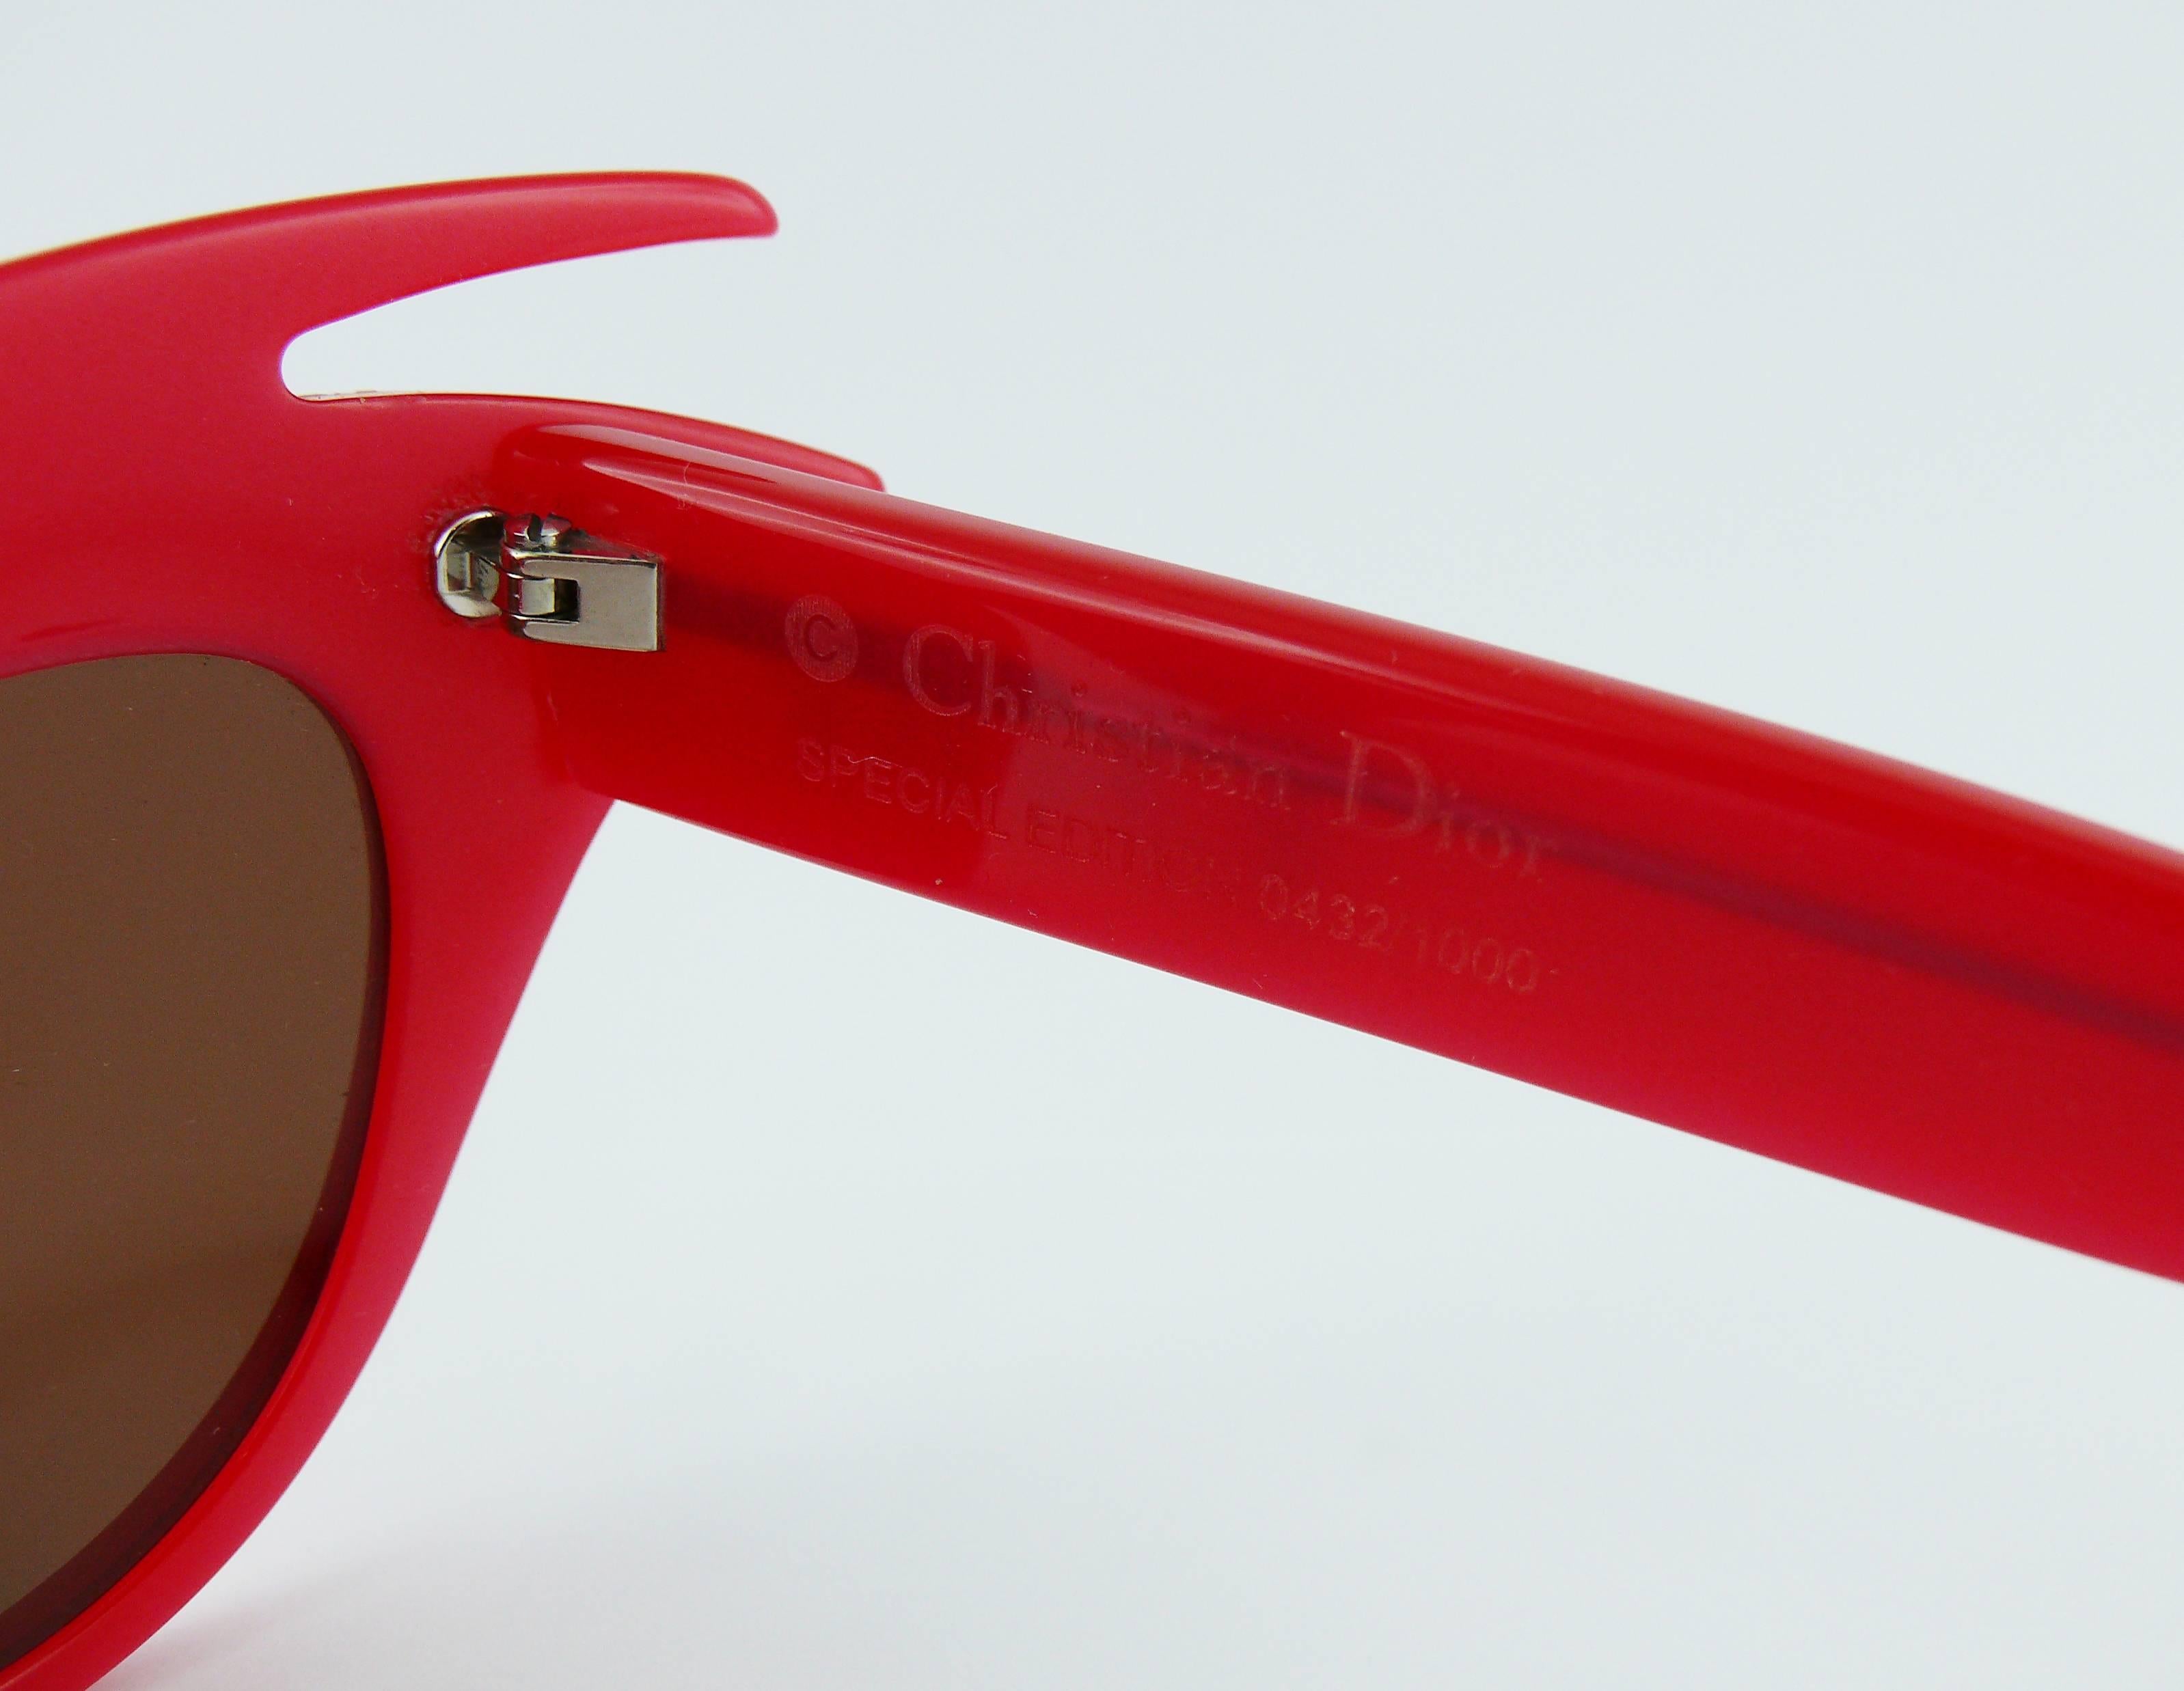 Christian Dior Miss Dior Cherie Limited Edition Raspberry Red Sunglasses 3